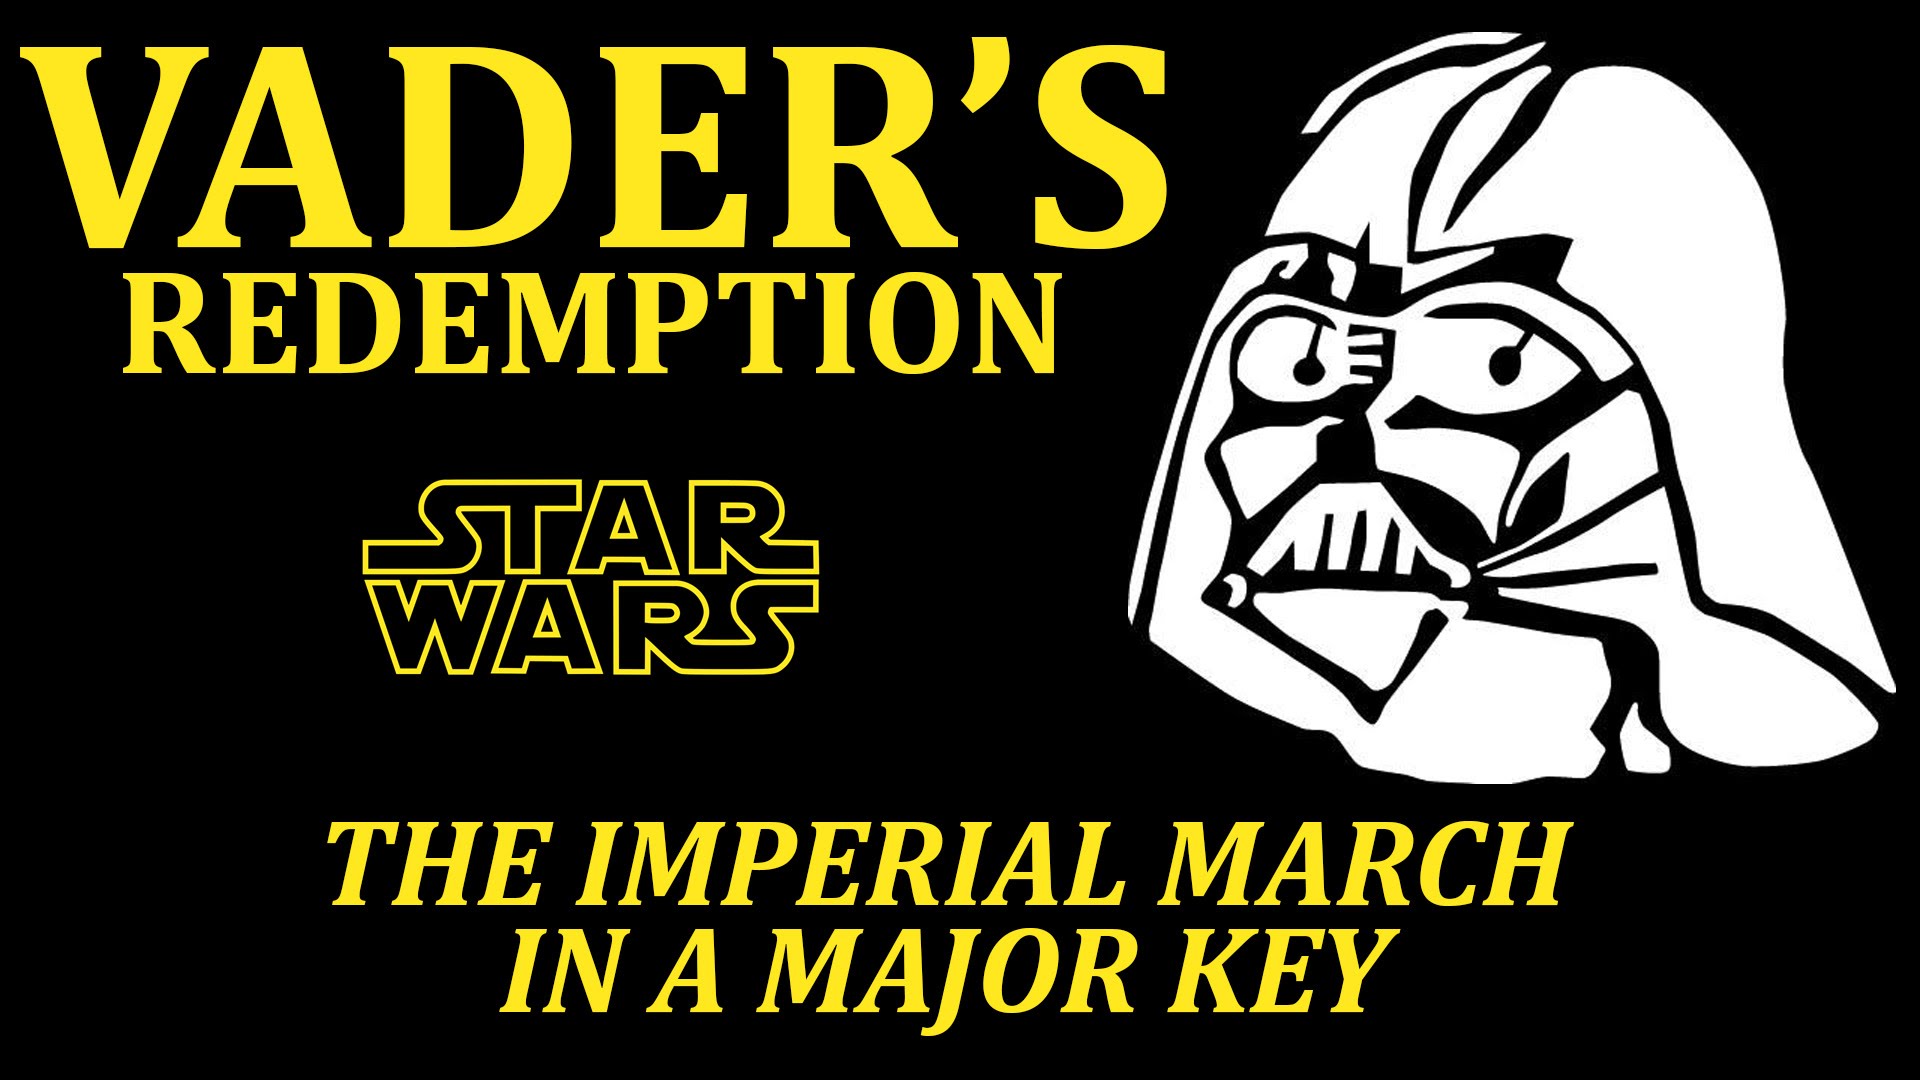 Vader Redemption or The Imperial March